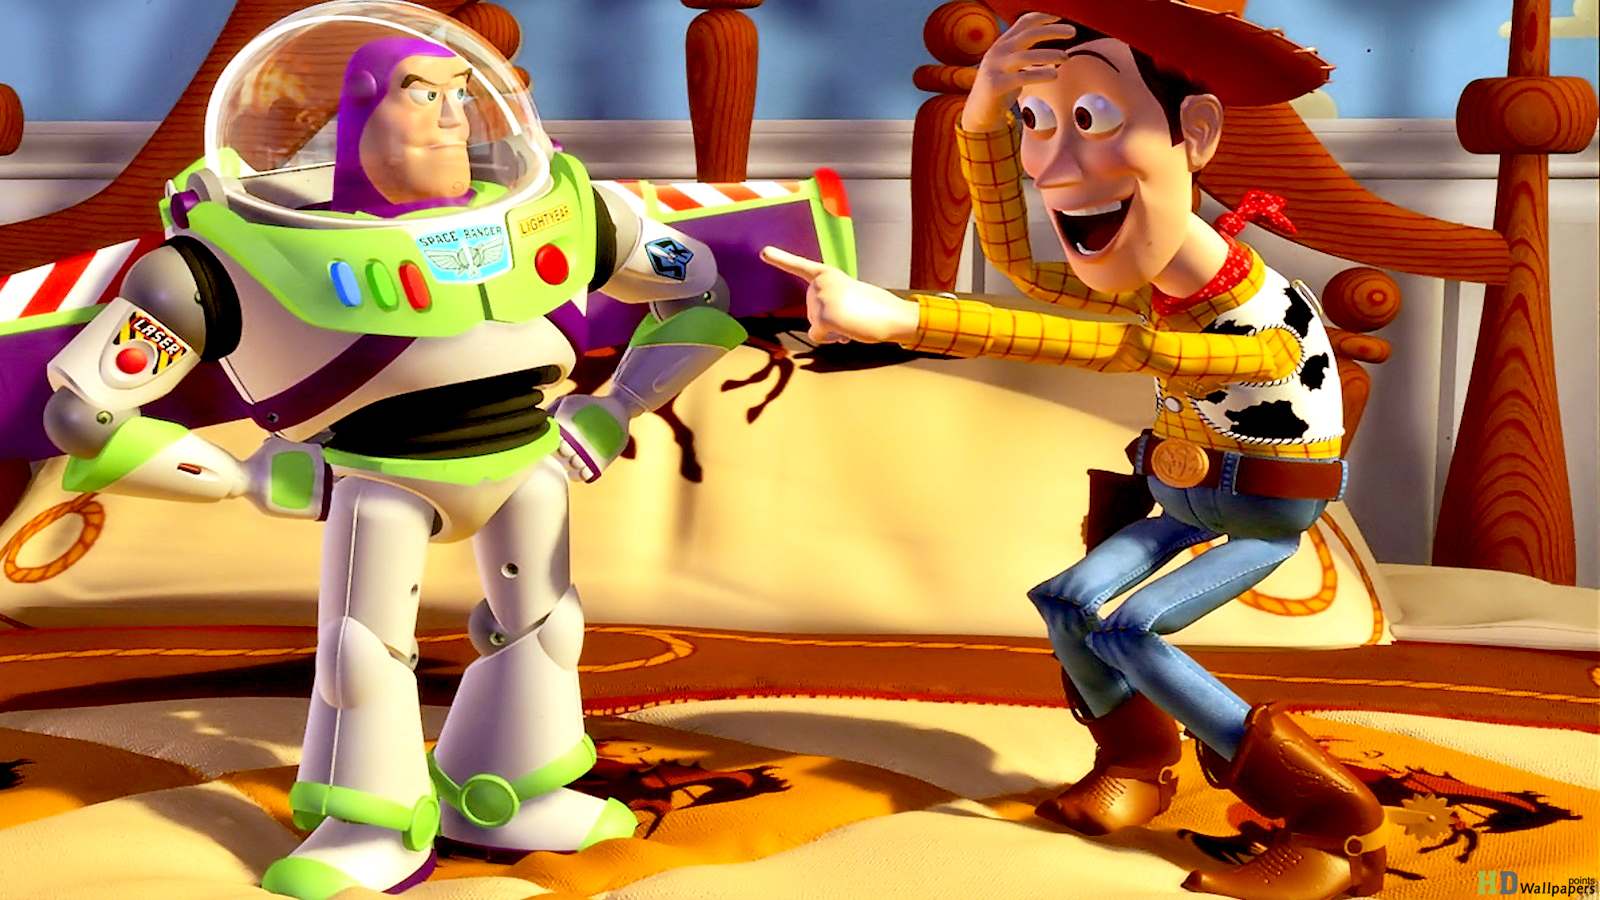  Toy story woody black background cowboys dildos wallpaper  96109